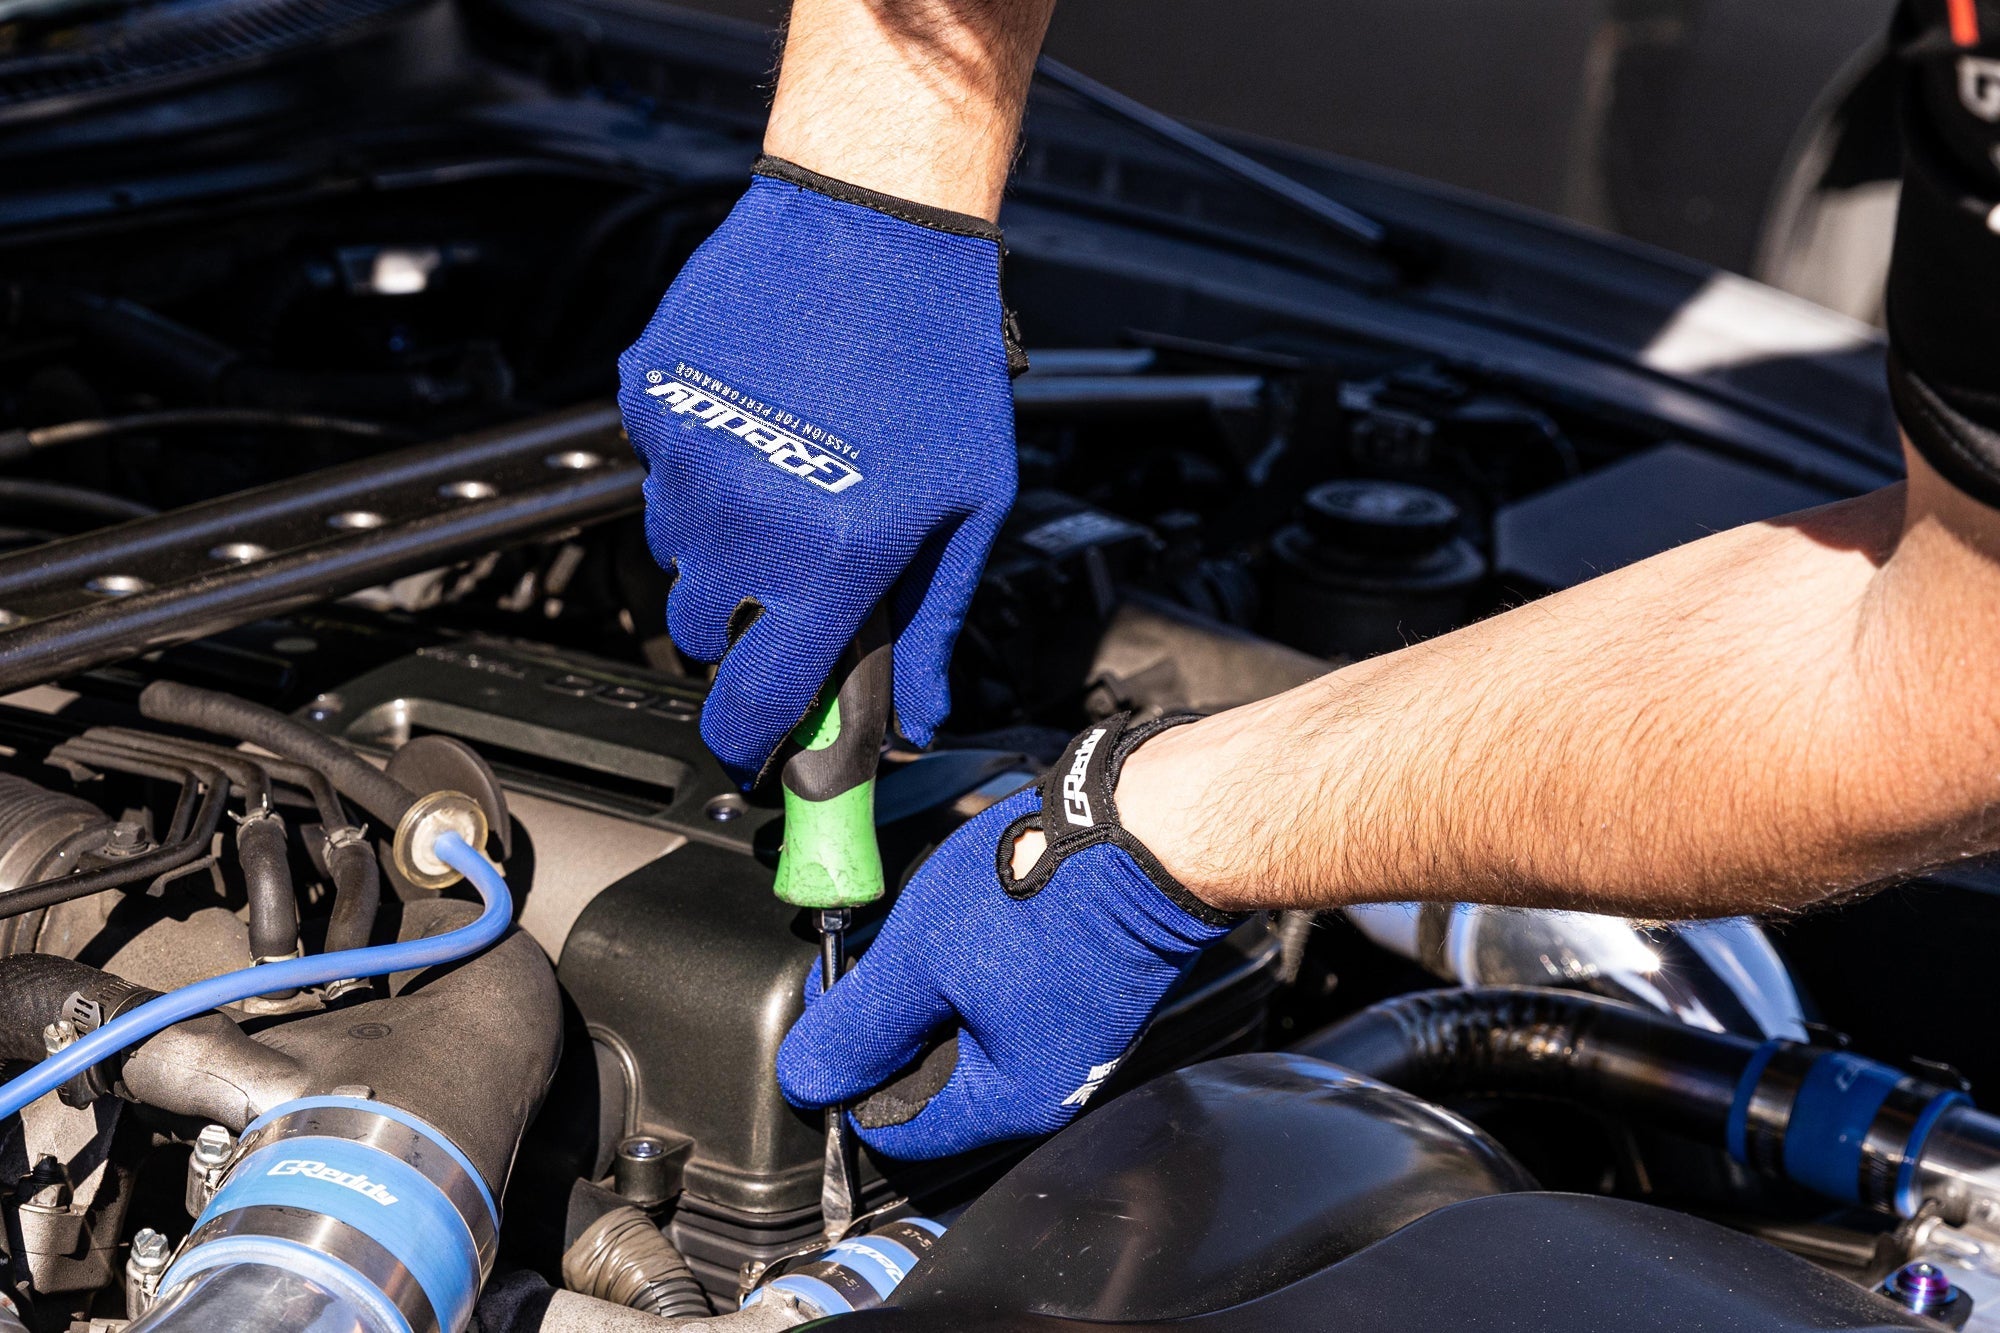 JDM GReddy "Passion for Performance" Mechanic's Gloves - Blue and Black